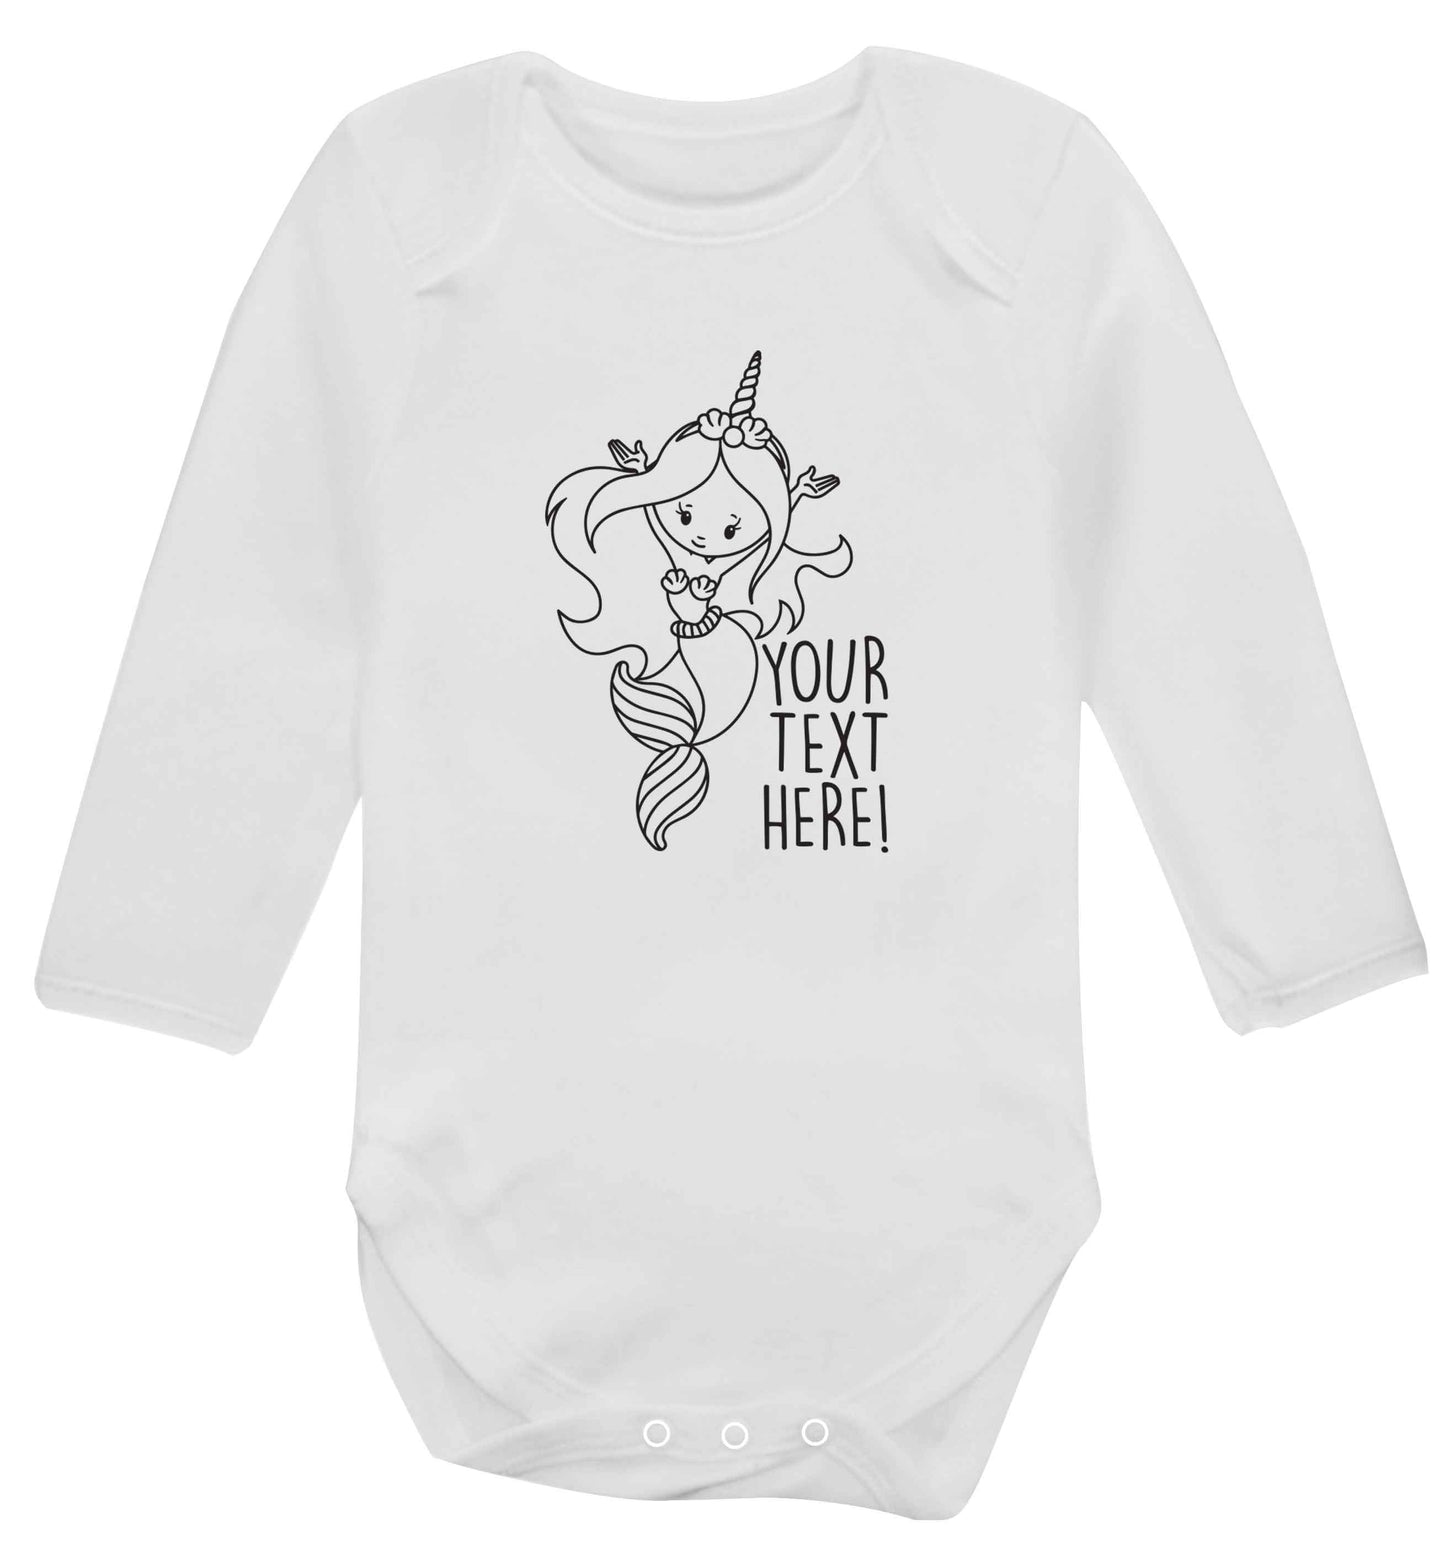 Mermaid with unicorn headband any text baby vest long sleeved white 6-12 months